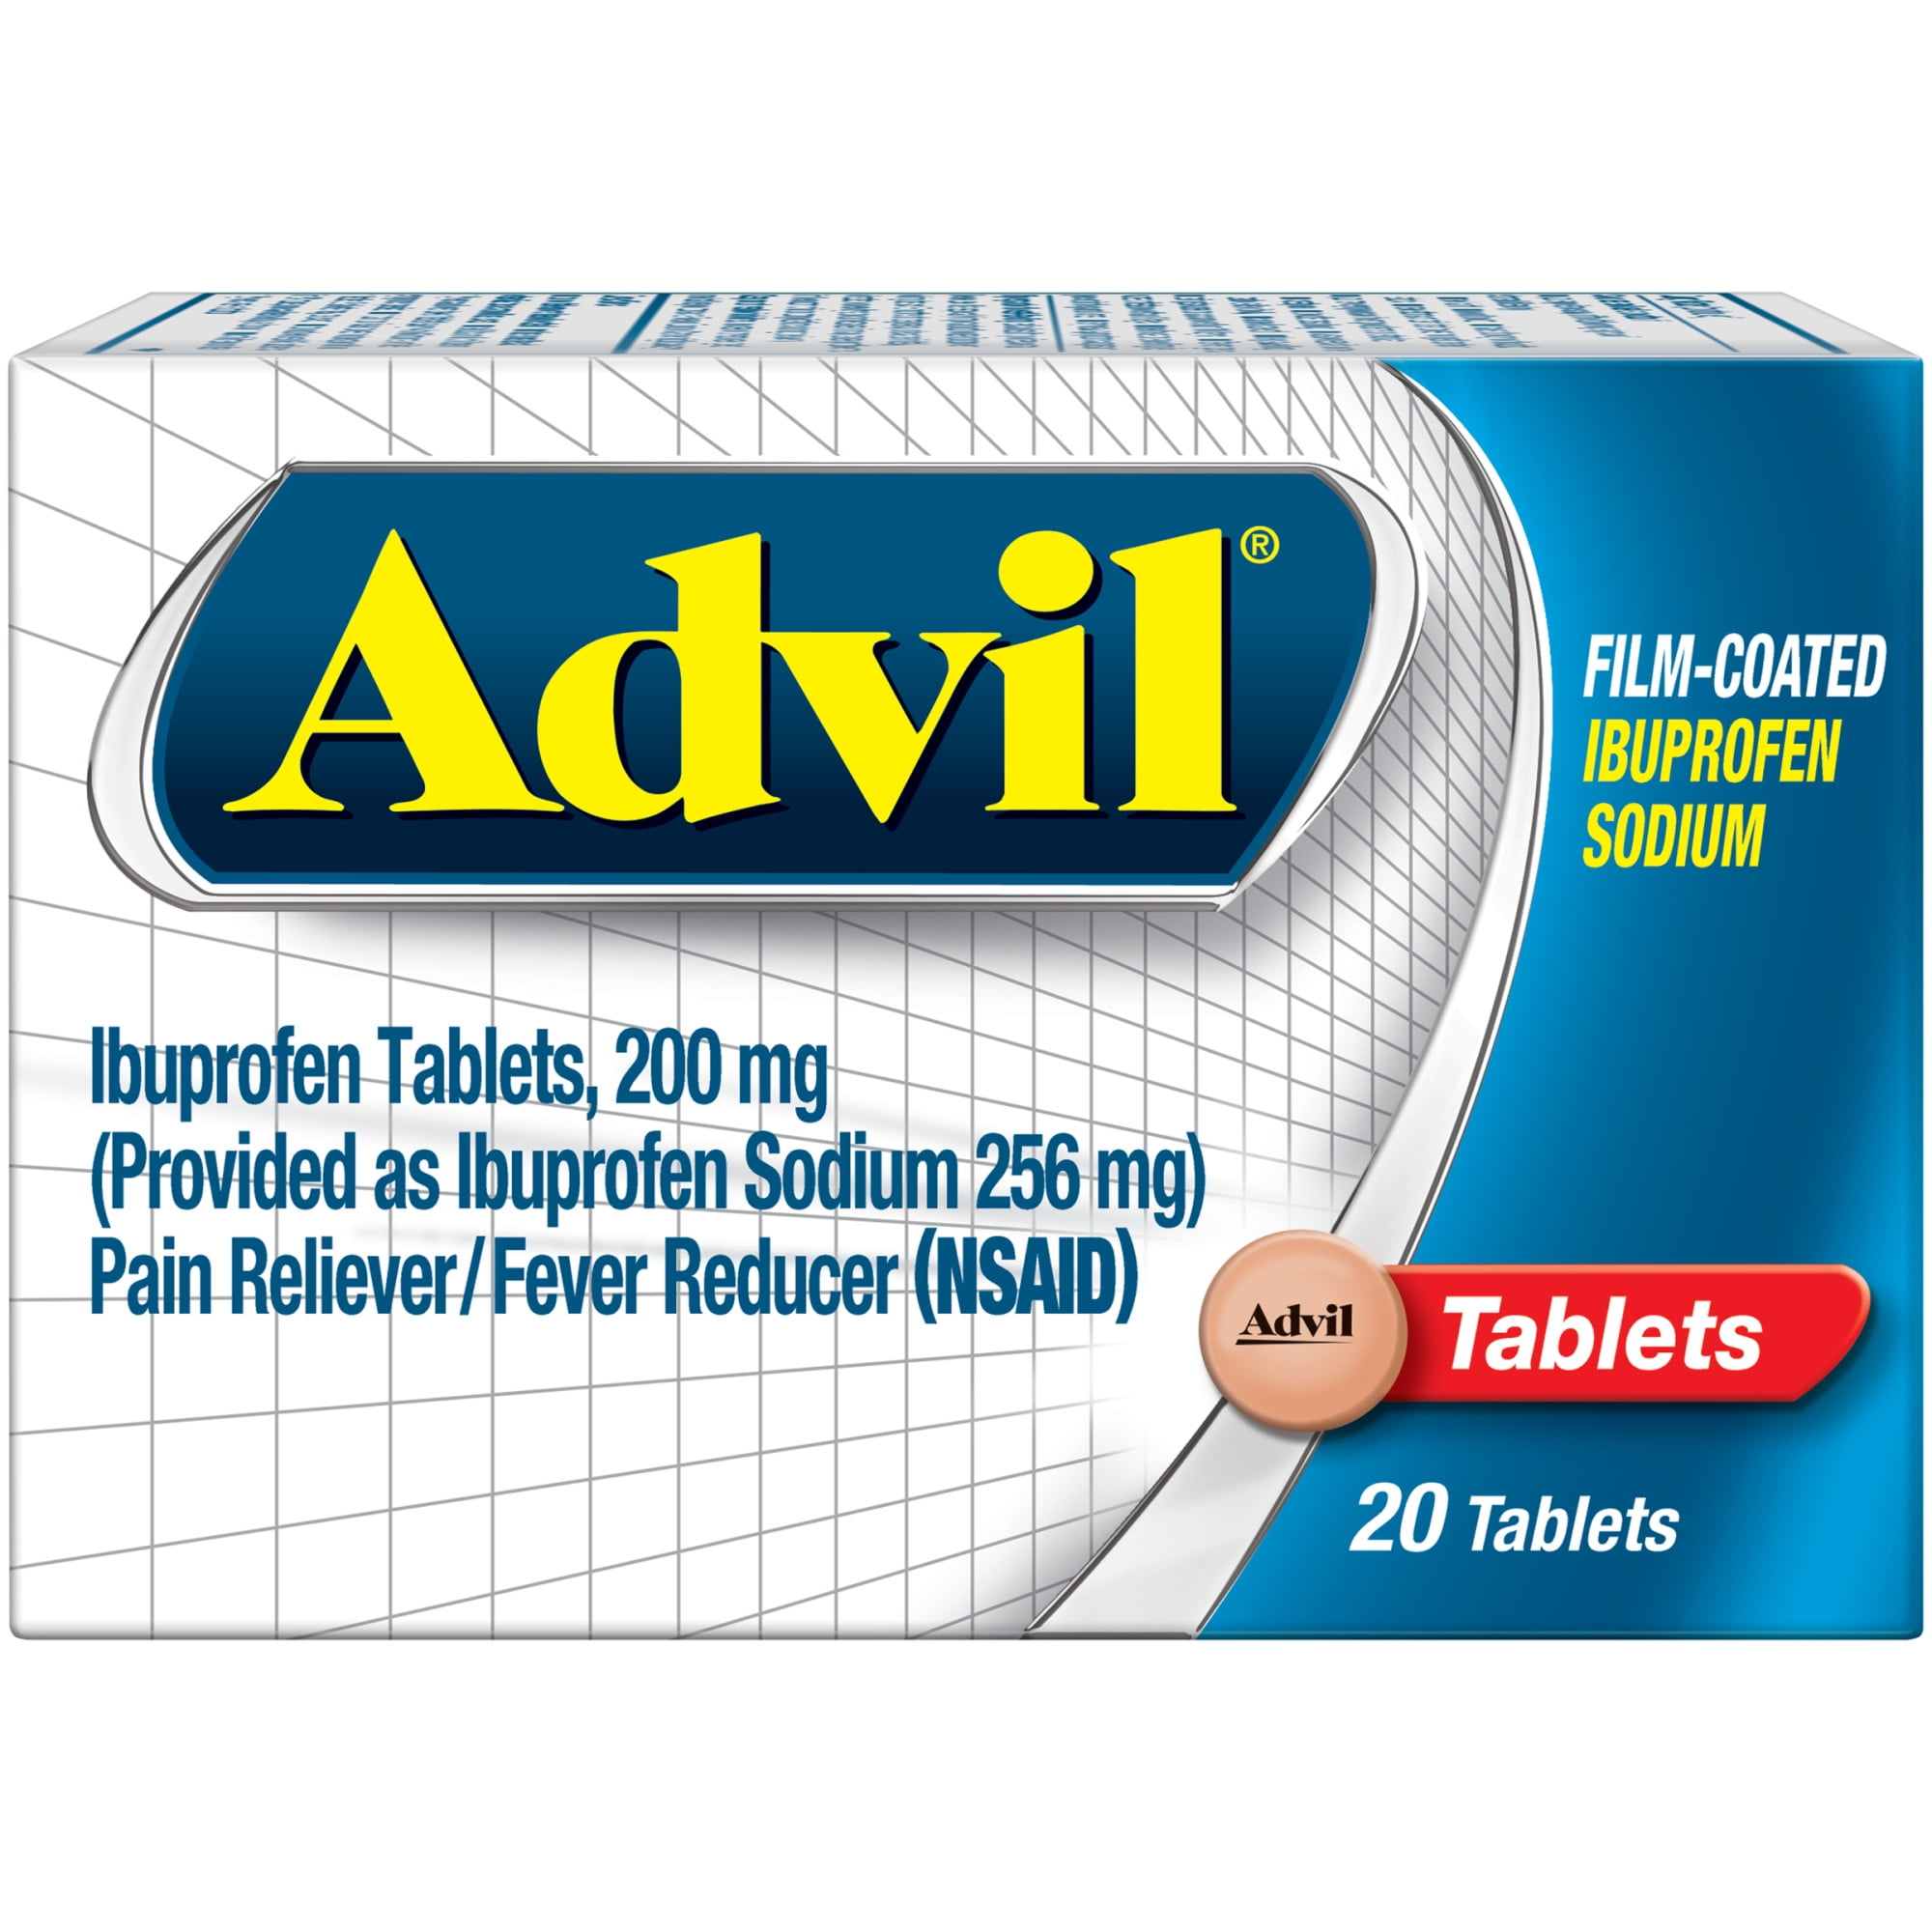 is advil or ibuprofen better for toothache